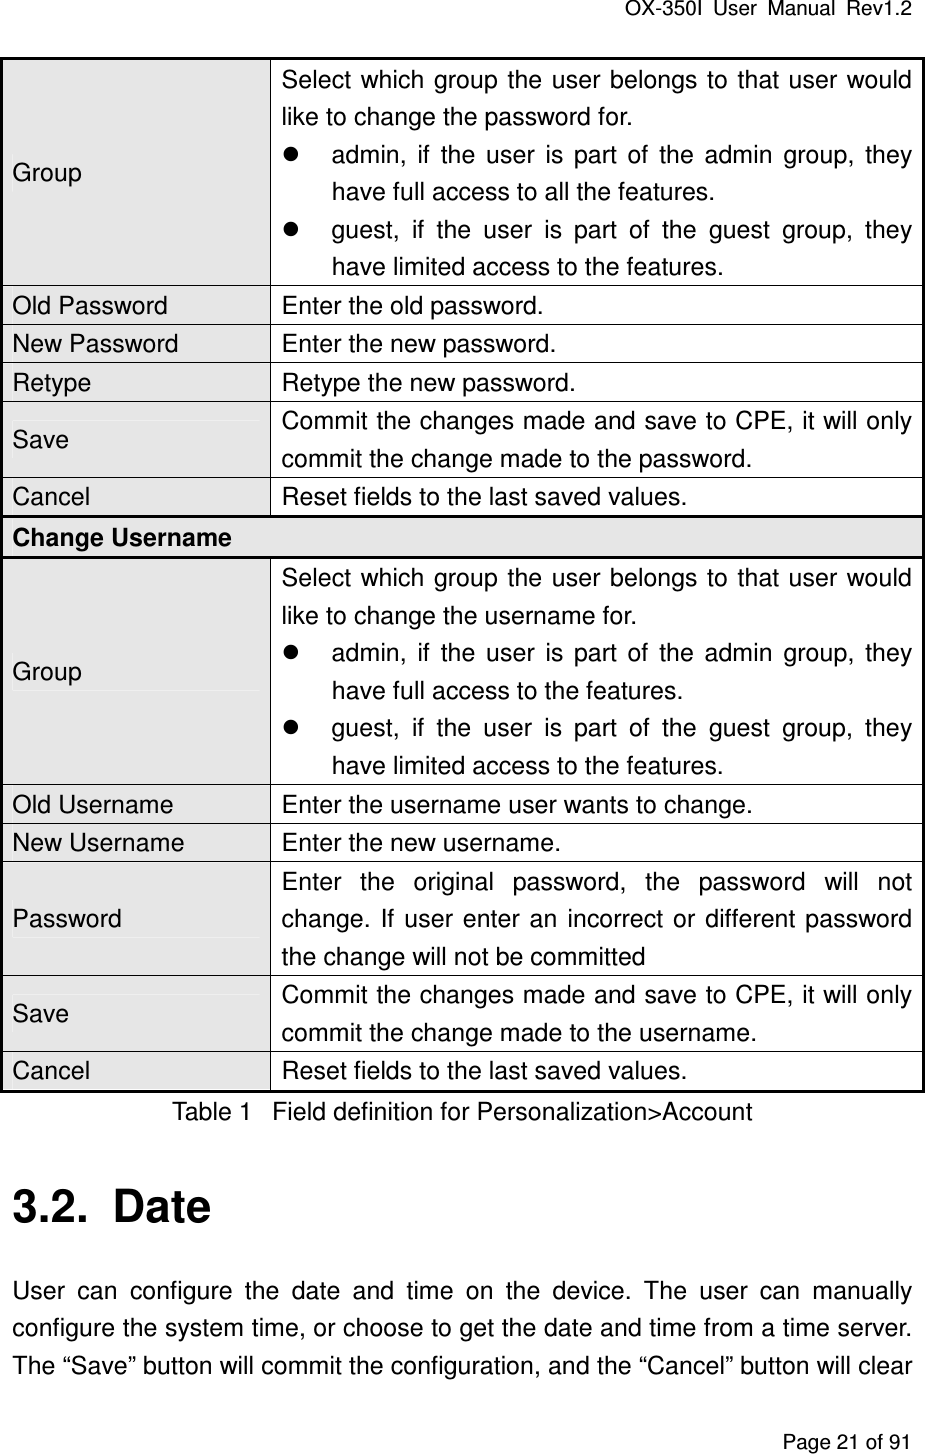 OX-350I  User  Manual  Rev1.2 Page 21 of 91 Group Select which group  the user belongs to that user would like to change the password for.   admin,  if  the  user  is  part  of  the  admin  group,  they have full access to all the features.   guest,  if  the  user  is  part  of  the  guest  group,  they have limited access to the features. Old Password  Enter the old password. New Password  Enter the new password. Retype  Retype the new password. Save  Commit the changes made and save to CPE, it will only commit the change made to the password. Cancel  Reset fields to the last saved values. Change Username Group Select which group  the user belongs to that user would like to change the username for.   admin,  if  the  user  is  part  of  the  admin  group,  they have full access to the features.   guest,  if  the  user  is  part  of  the  guest  group,  they have limited access to the features. Old Username  Enter the username user wants to change. New Username  Enter the new username. Password Enter  the  original  password,  the  password  will  not change.  If  user enter an  incorrect  or  different  password the change will not be committed Save  Commit the changes made and save to CPE, it will only commit the change made to the username. Cancel  Reset fields to the last saved values. Table 1  Field definition for Personalization&gt;Account 3.2.  Date User  can  configure  the  date  and  time  on  the  device.  The  user  can  manually configure the system time, or choose to get the date and time from a time server. The “Save” button will commit the configuration, and the “Cancel” button will clear 